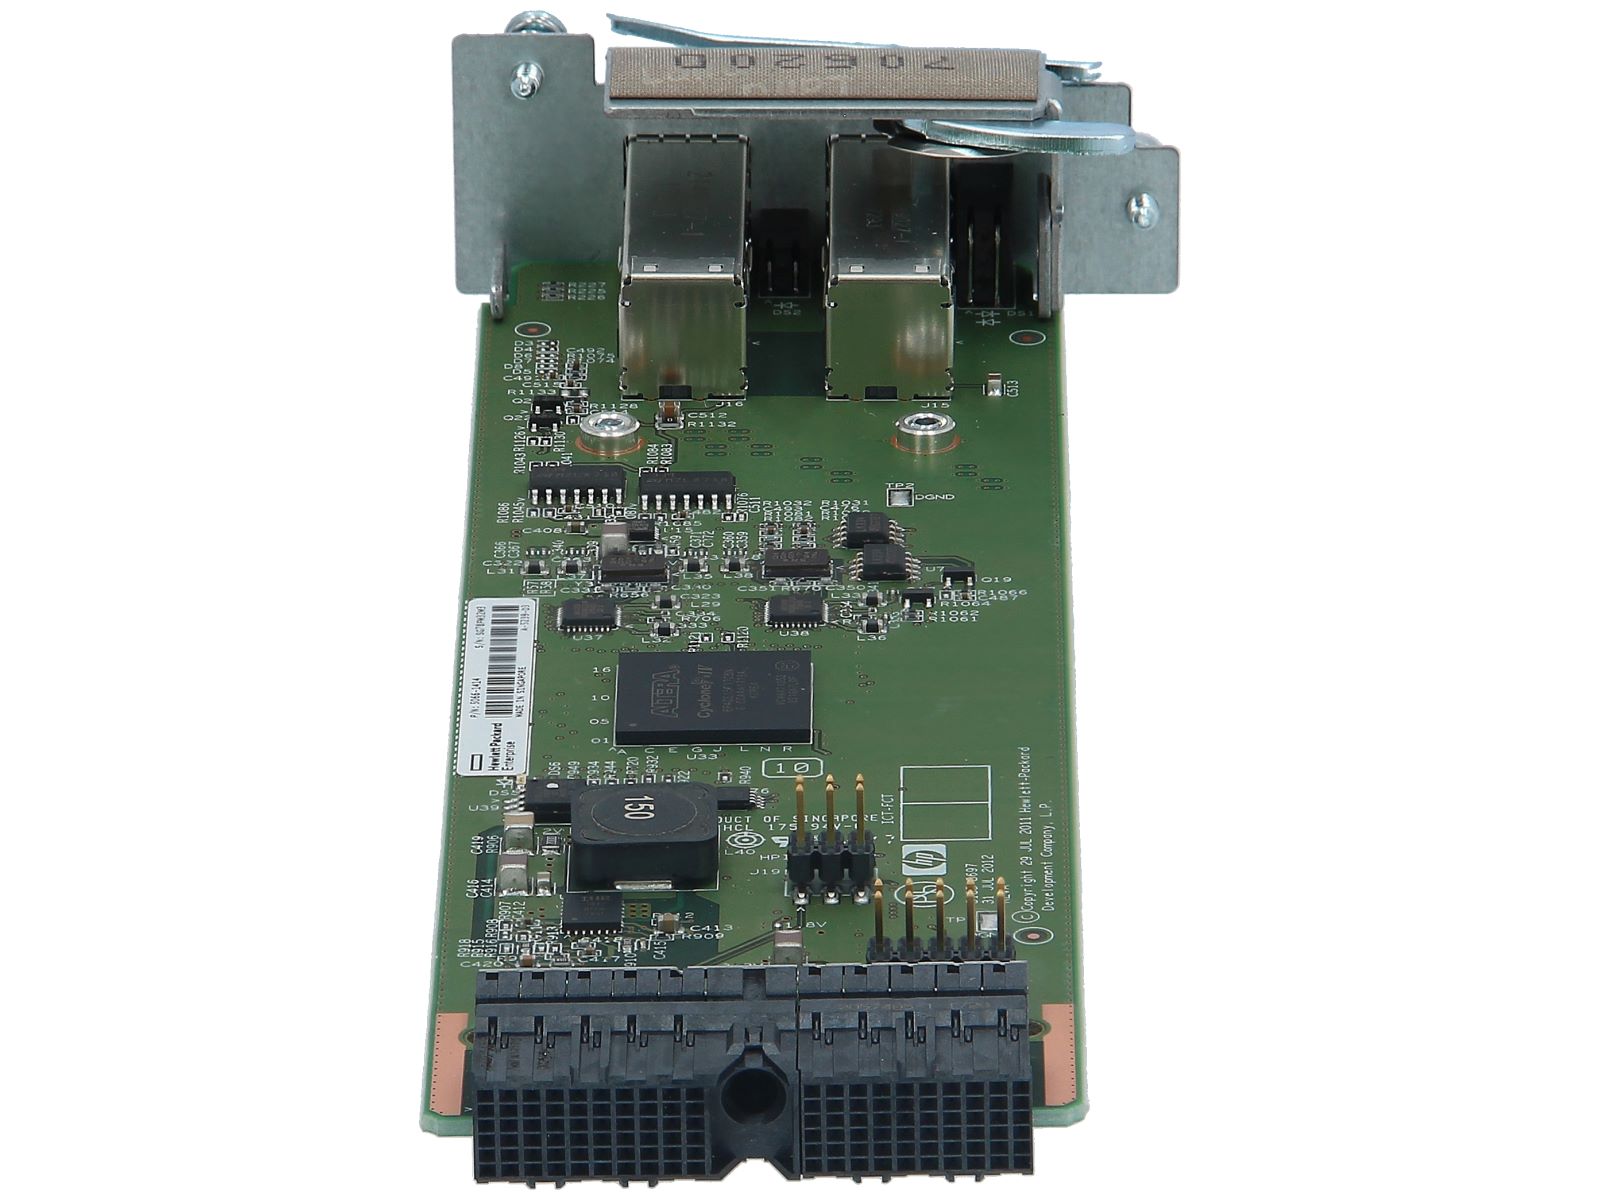 HPE J9733A 2920 2-Port Stacking Module